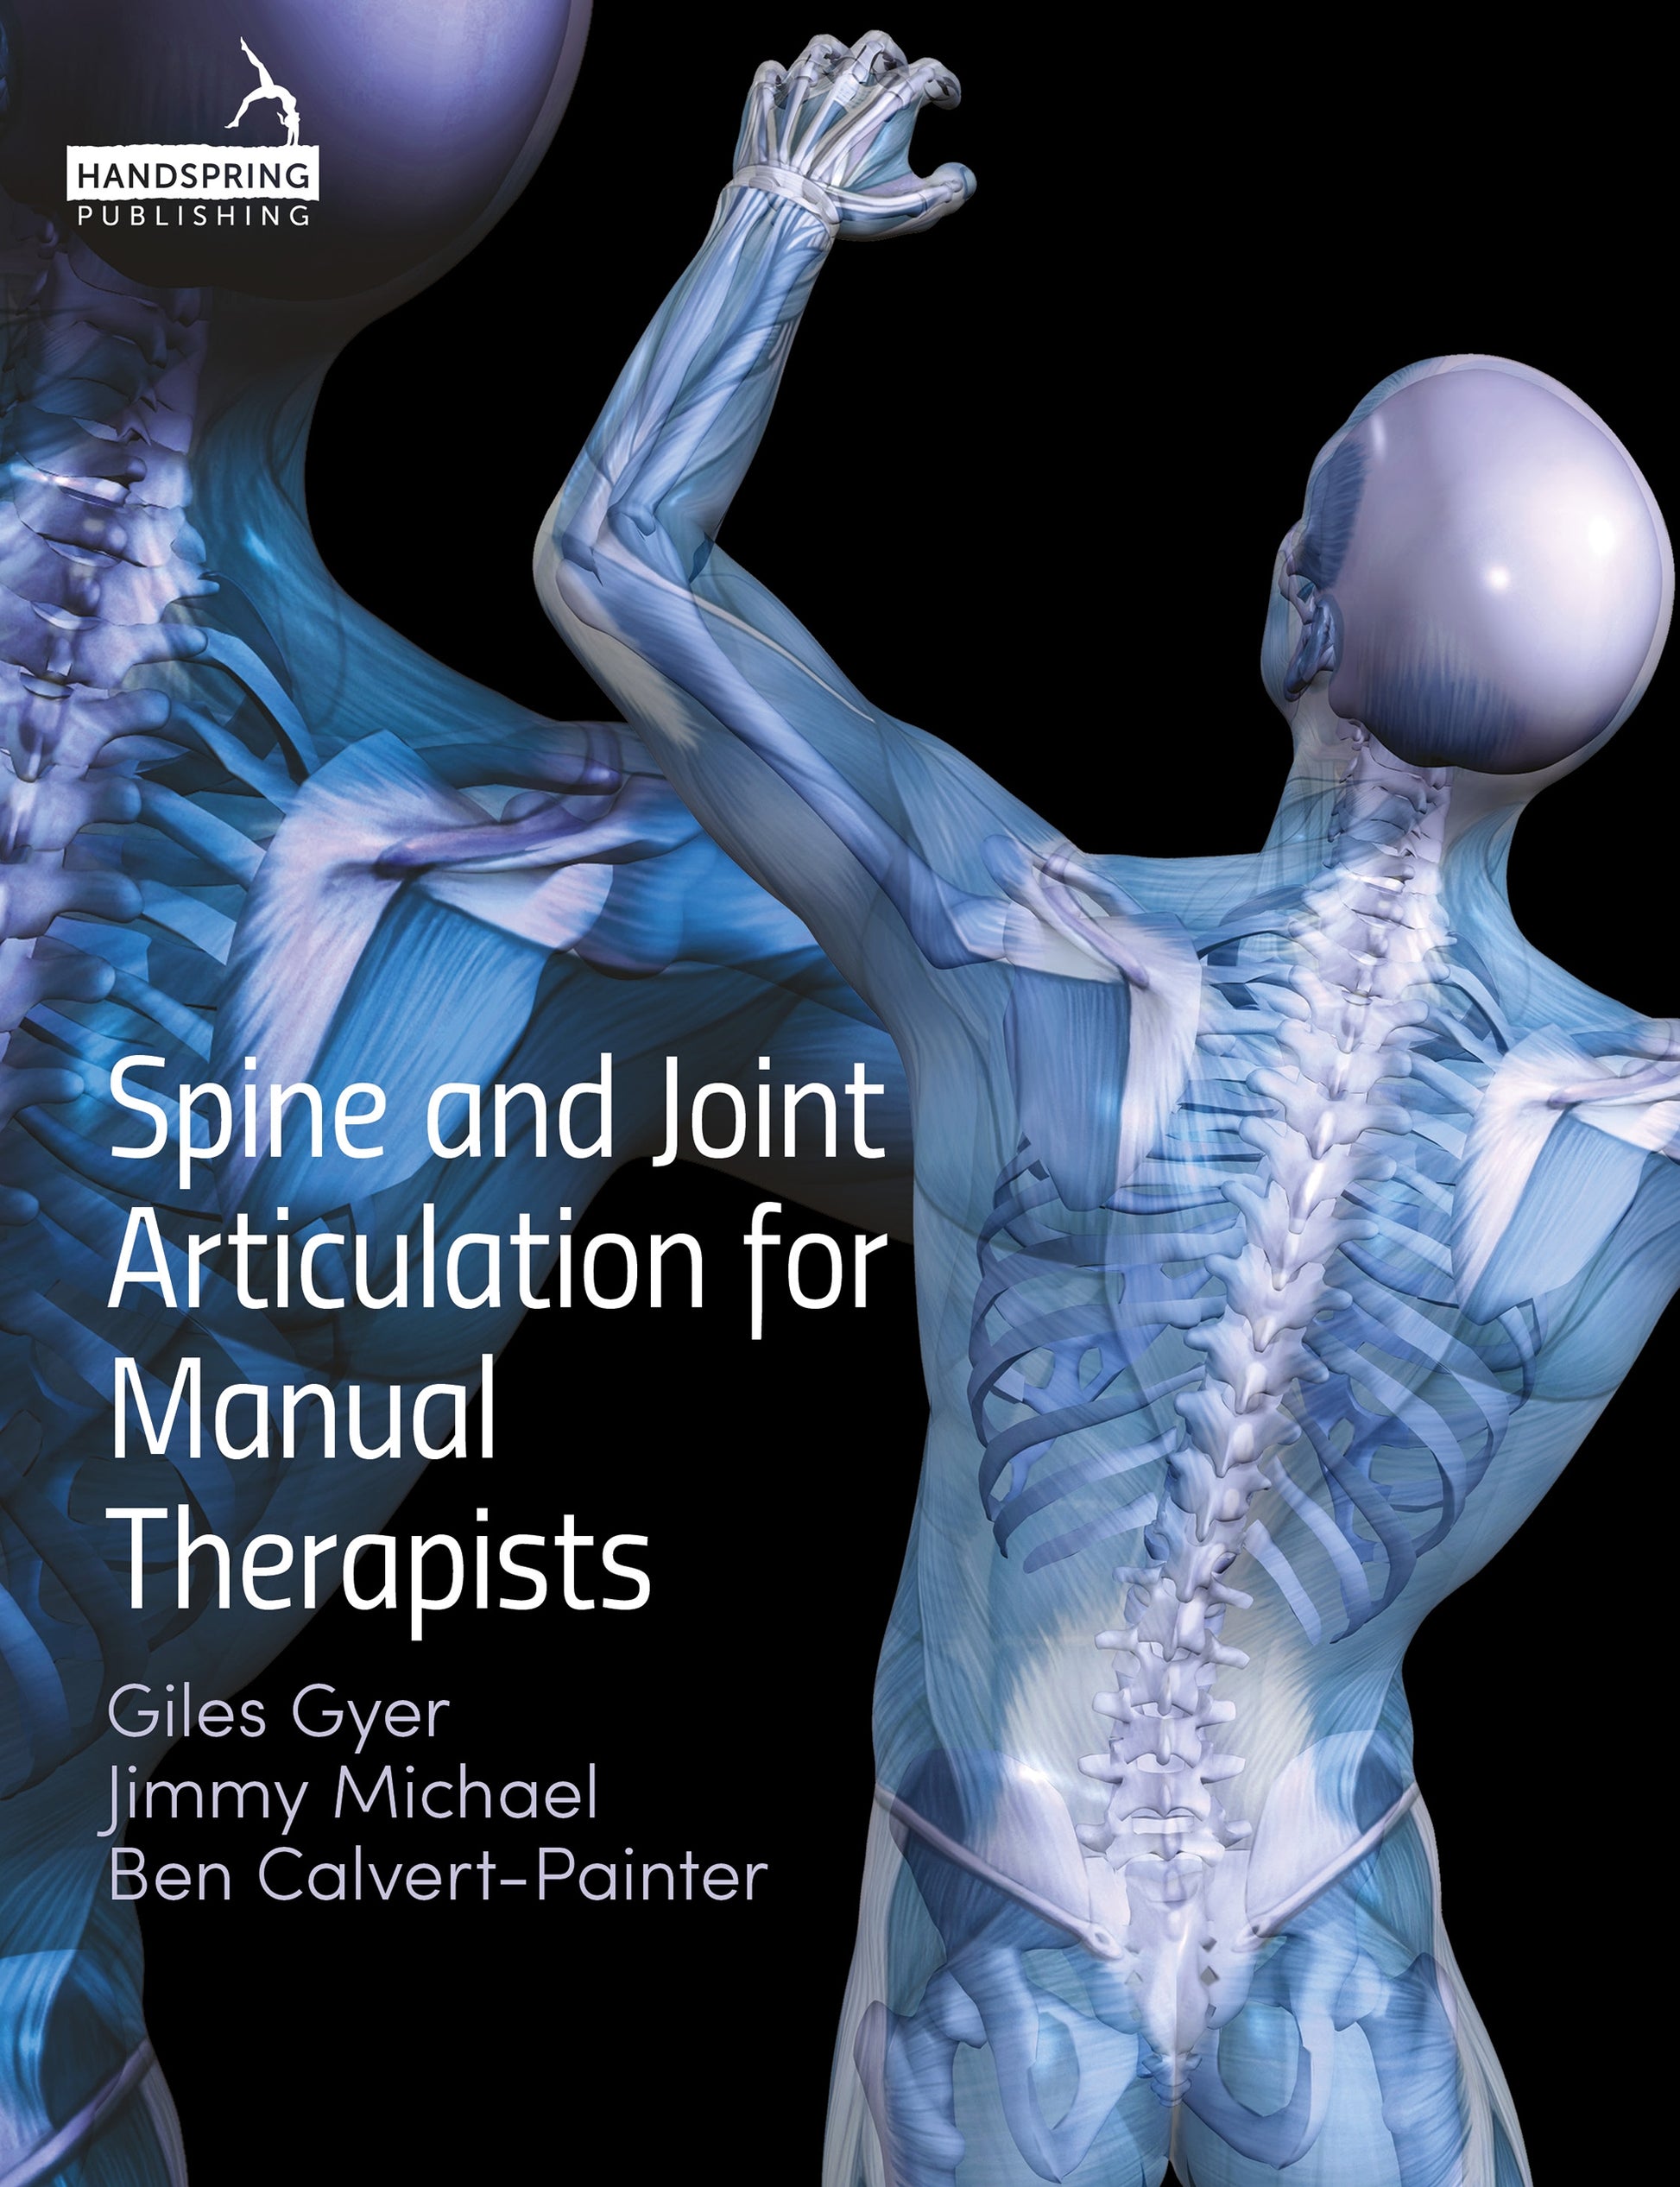 Spine and Joint Articulation for Manual Therapists by Giles Gyer, Jimmy Michael, Ben Calvert-Painter